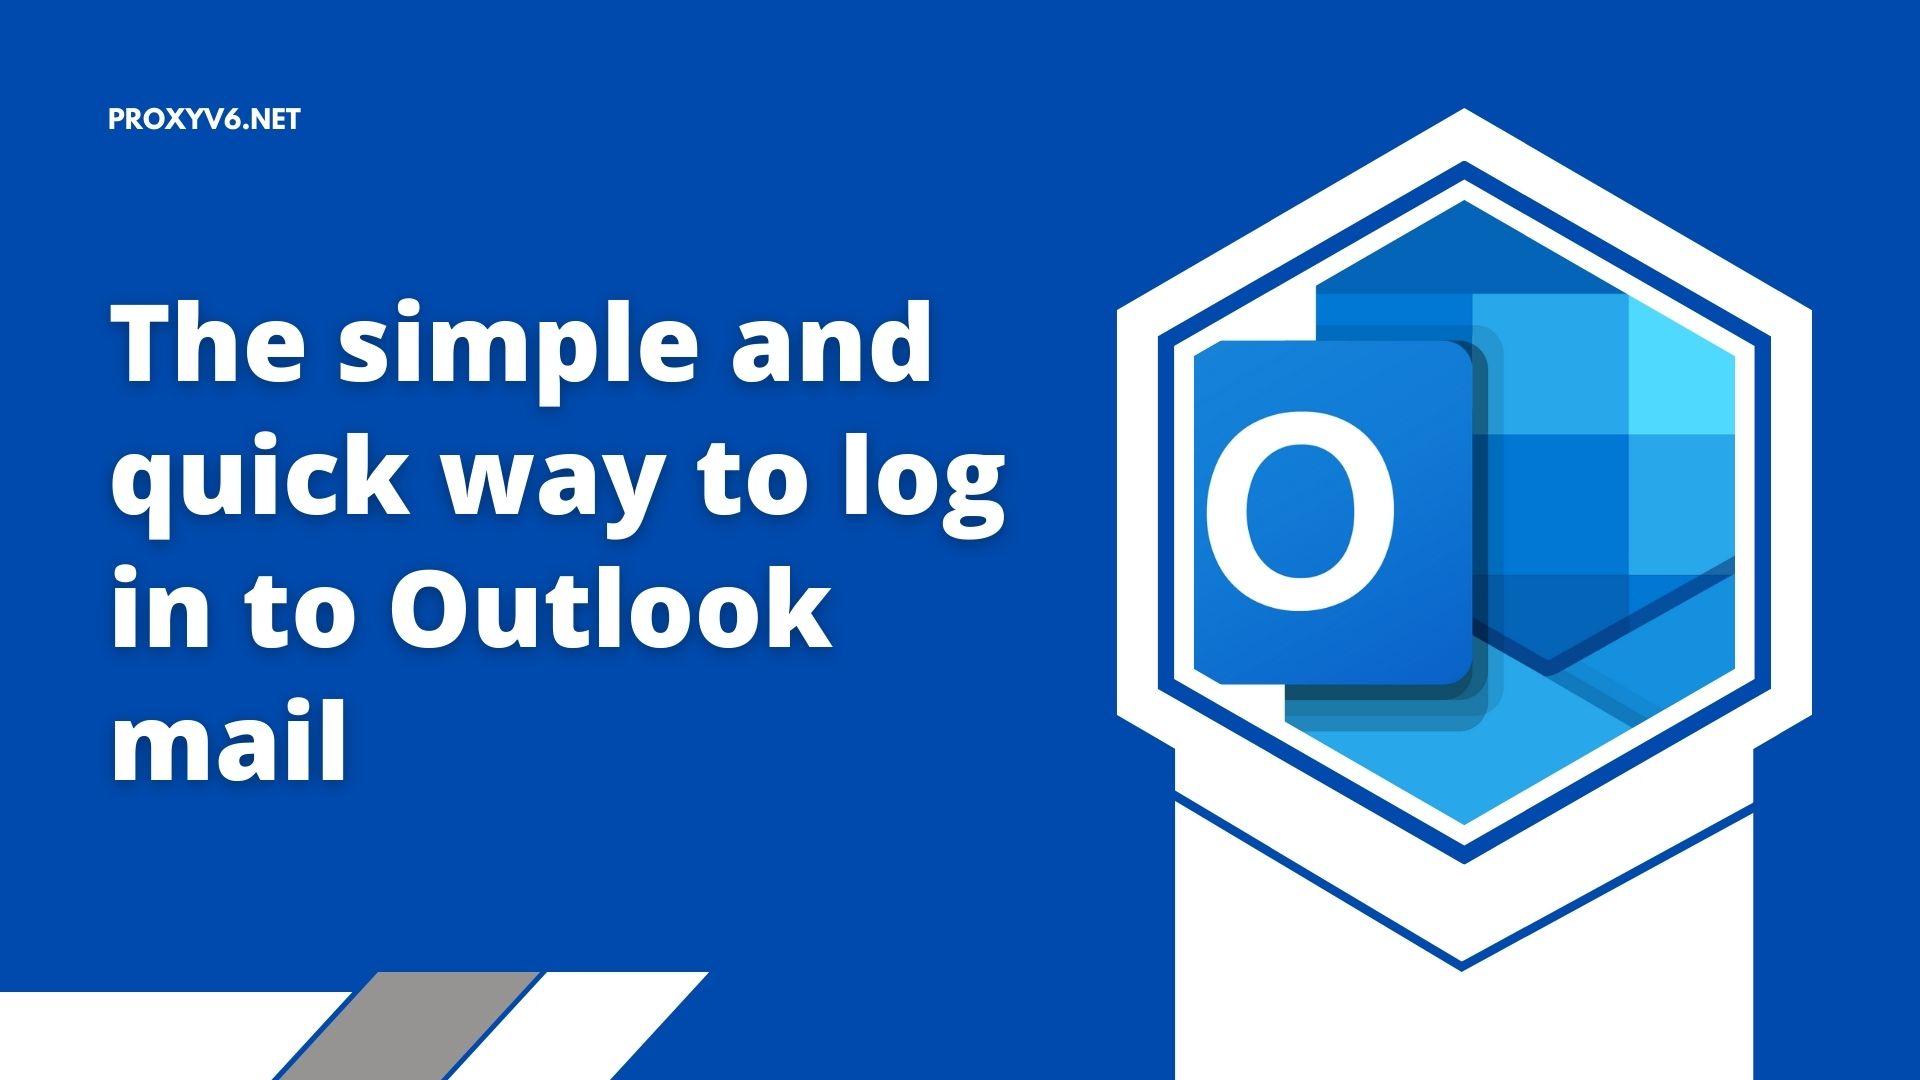 The simple and quick way to log in to Outlook mail